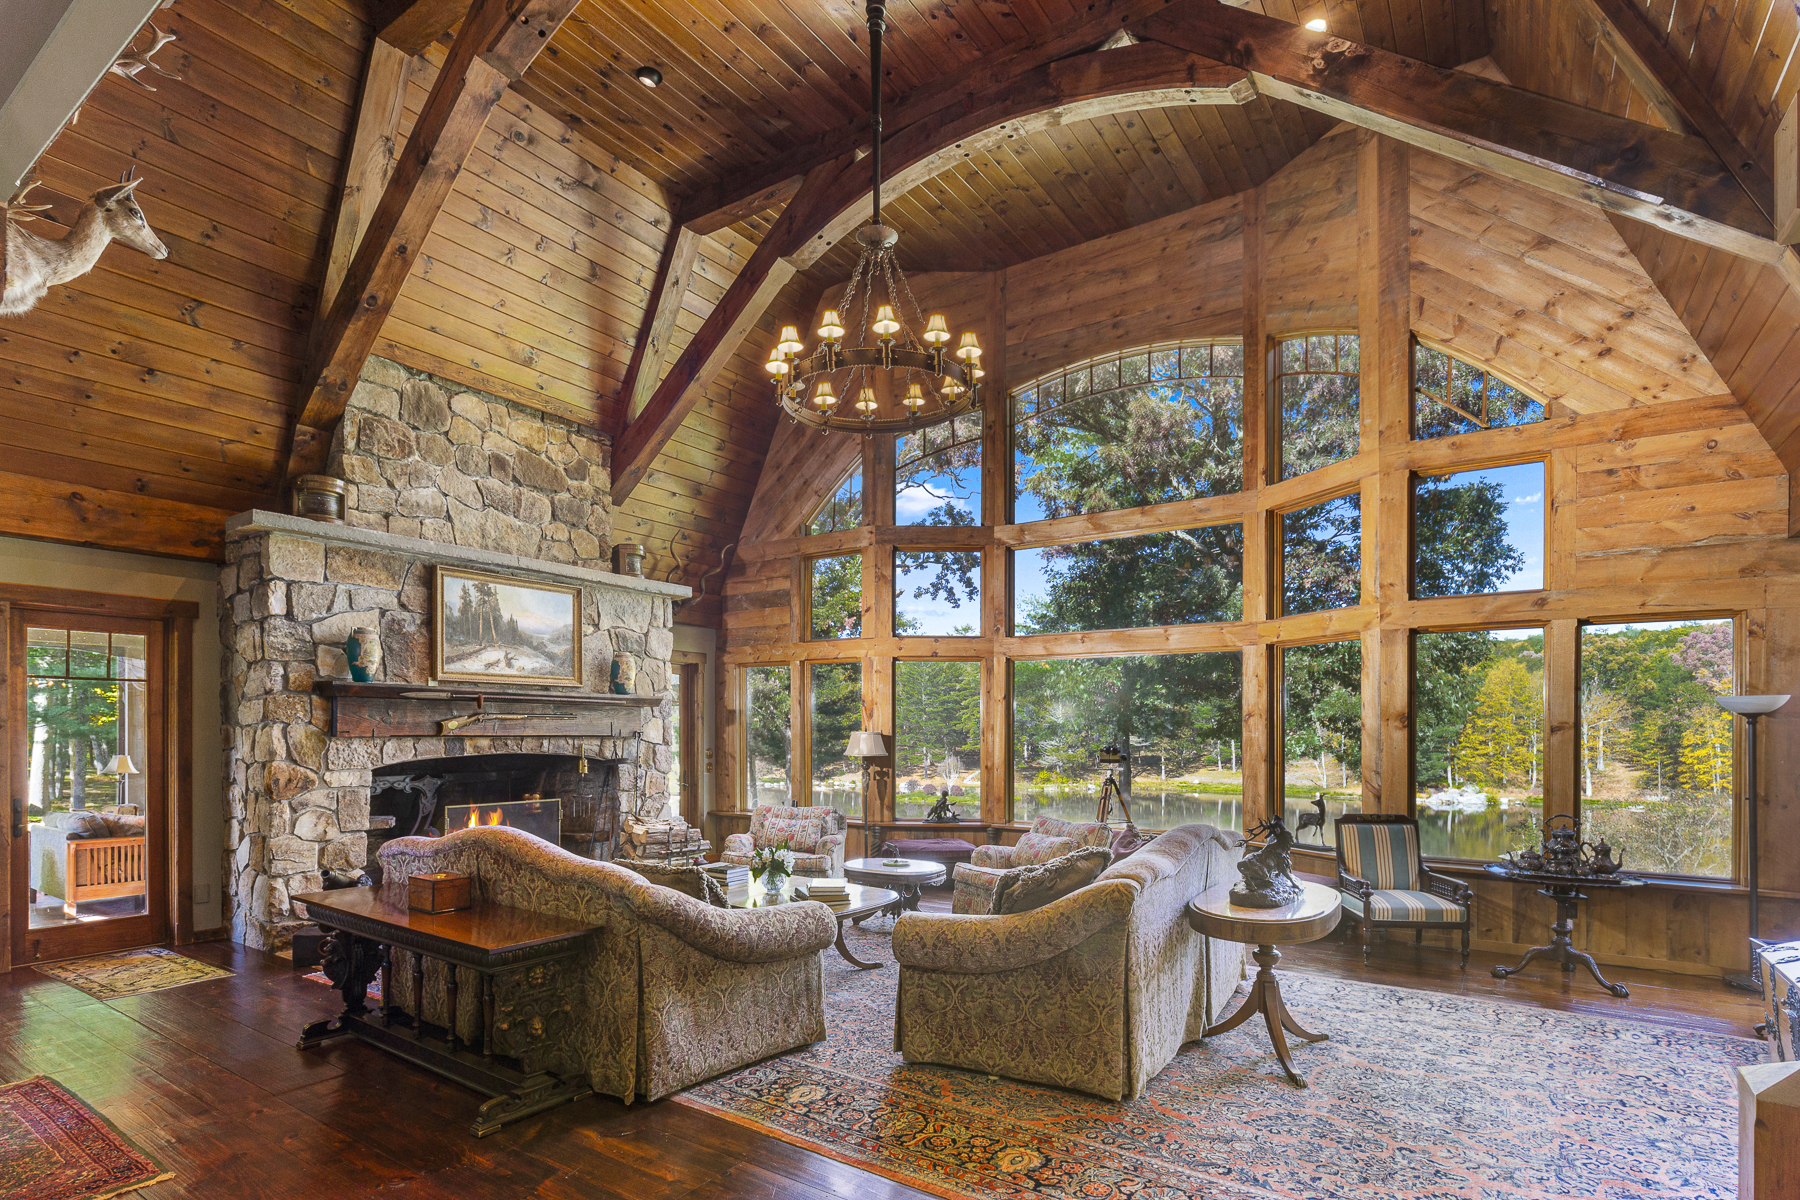 For $4.7M, live in this amazing upstate lodge set on 125 acres